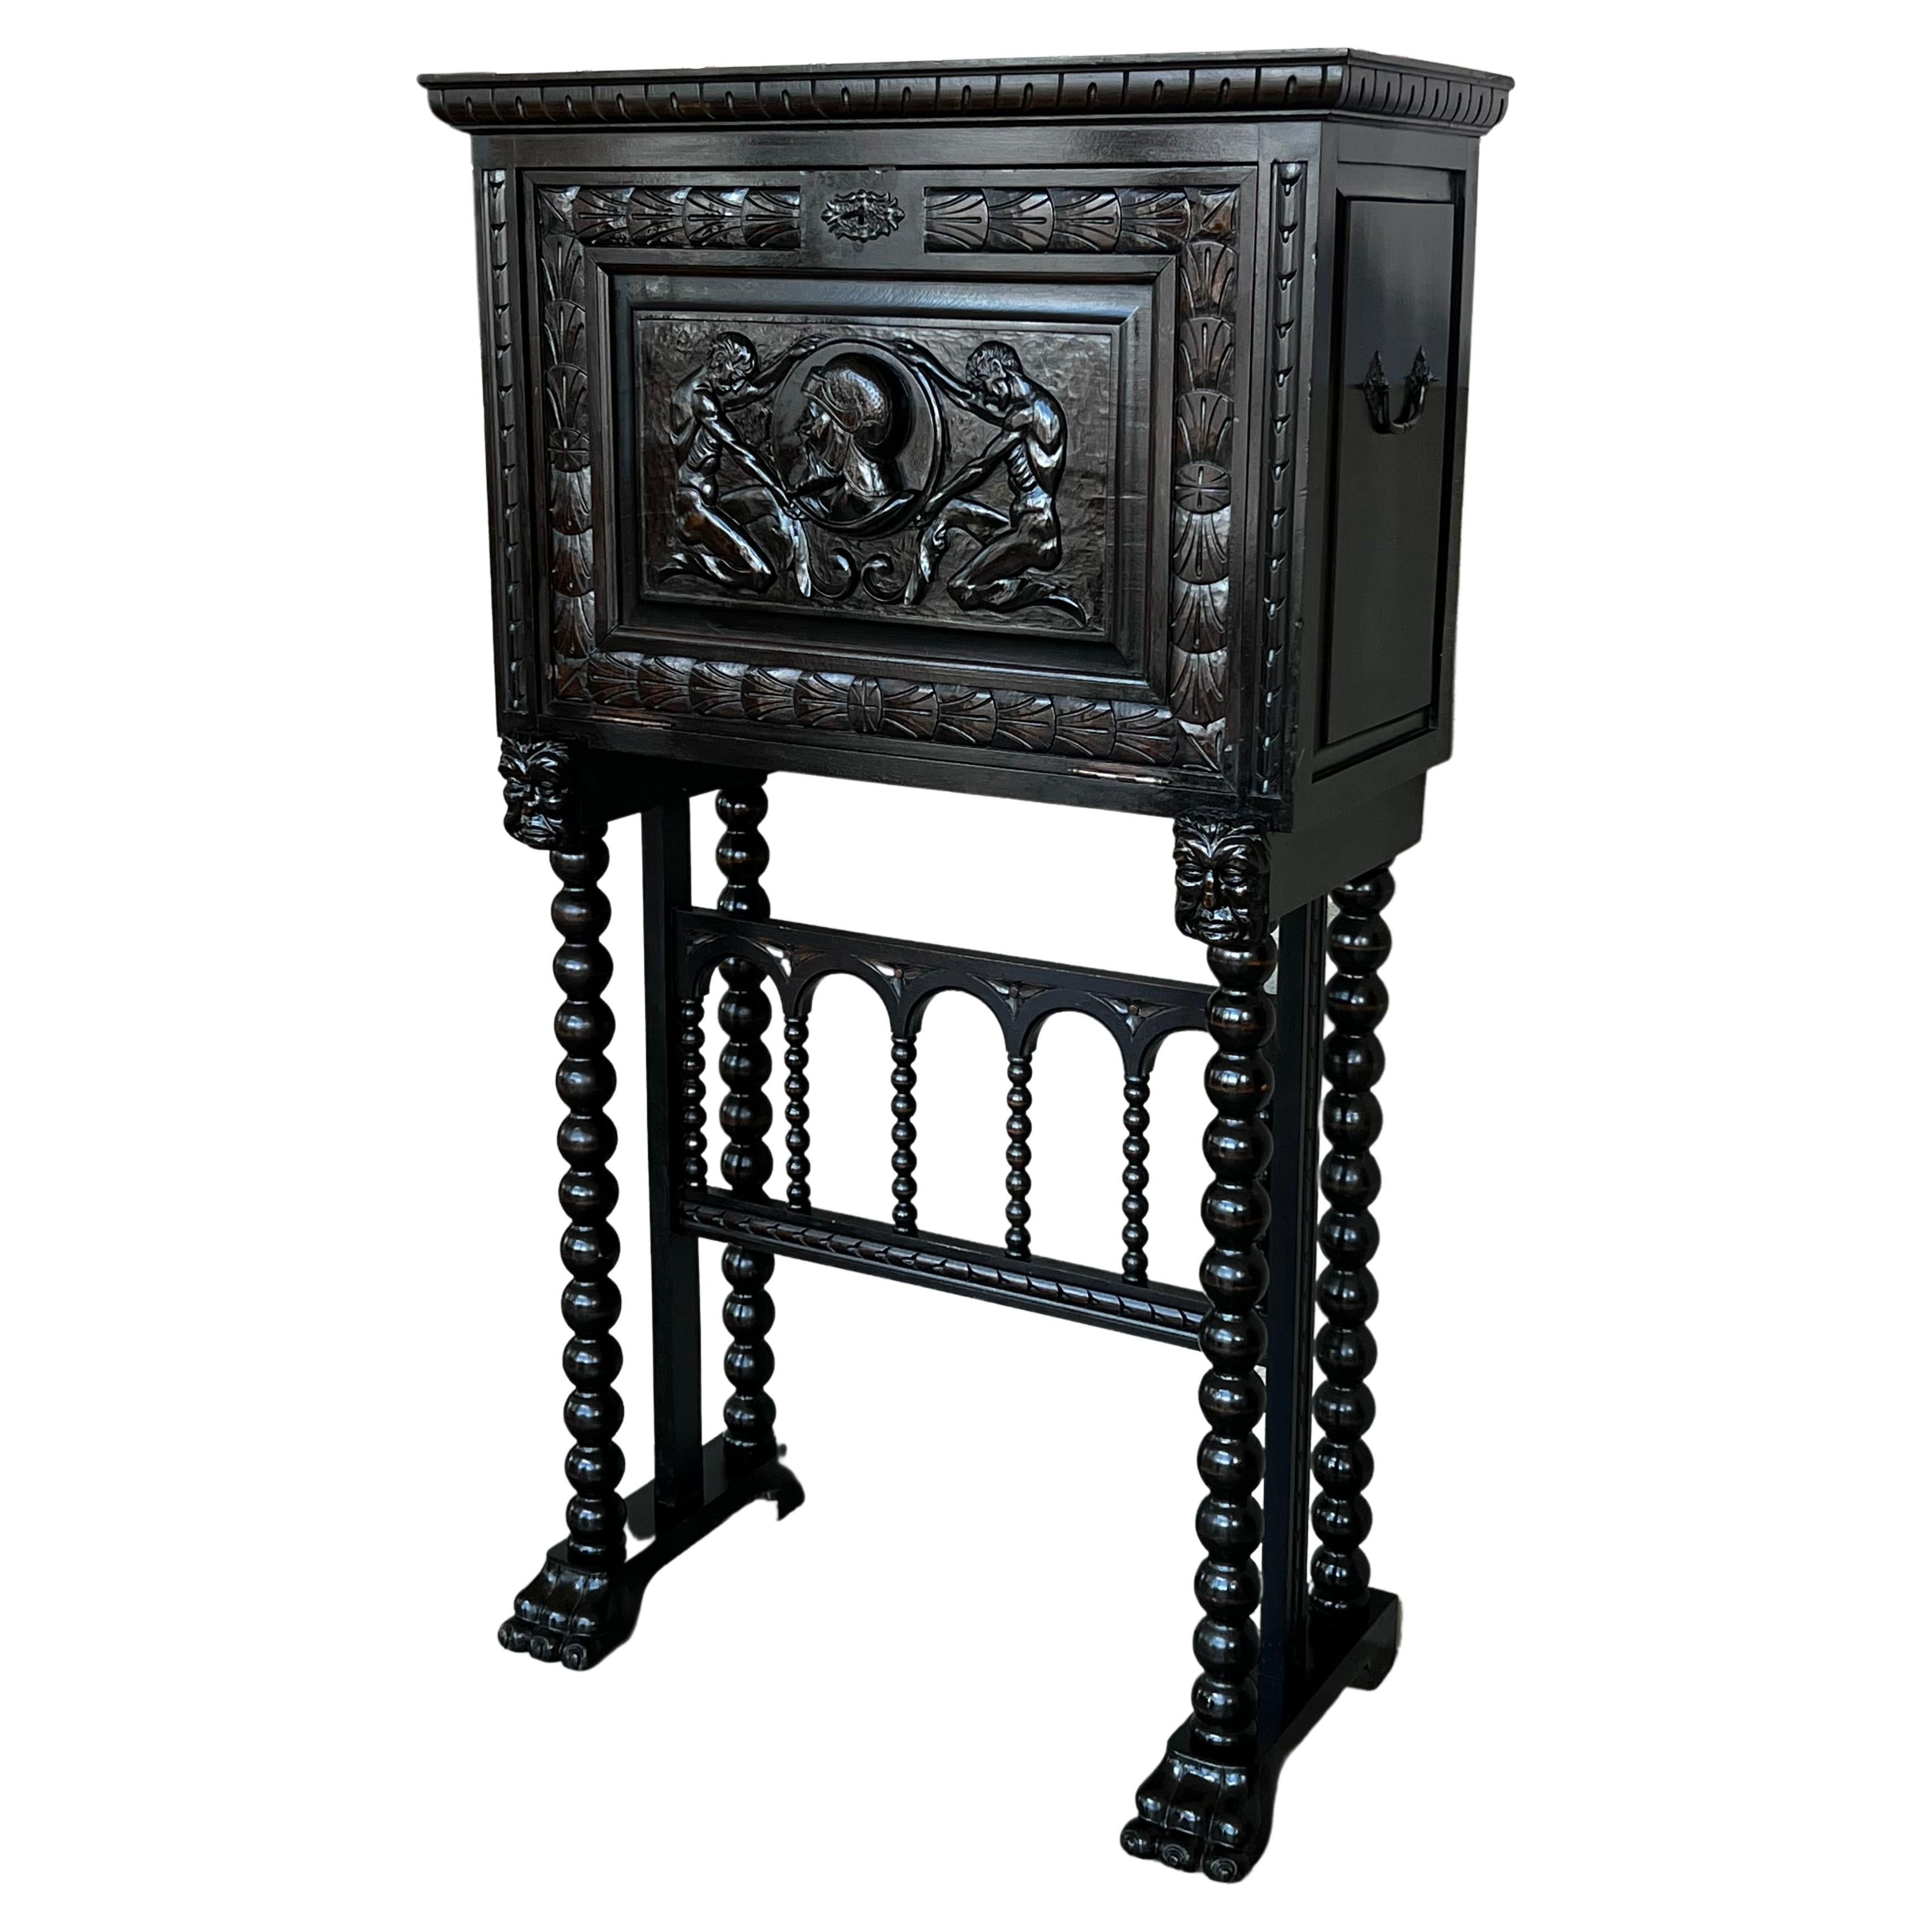 20th Century Spanish Baroque Style Cabinet on Stand, Bargueno or Varqueno